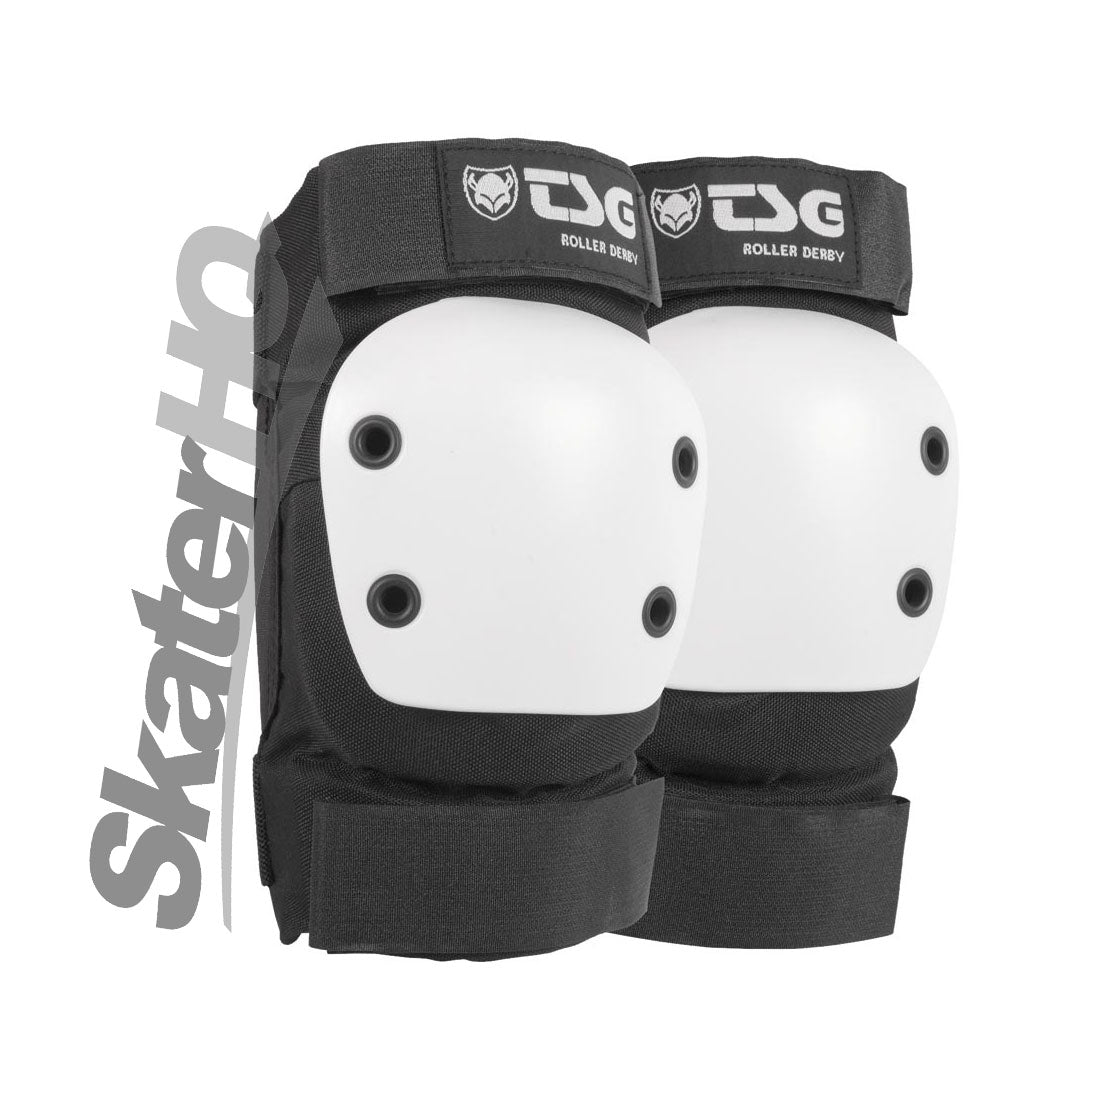 TSG Rollerderby Elbow 2.0 - XLarge Protective Gear